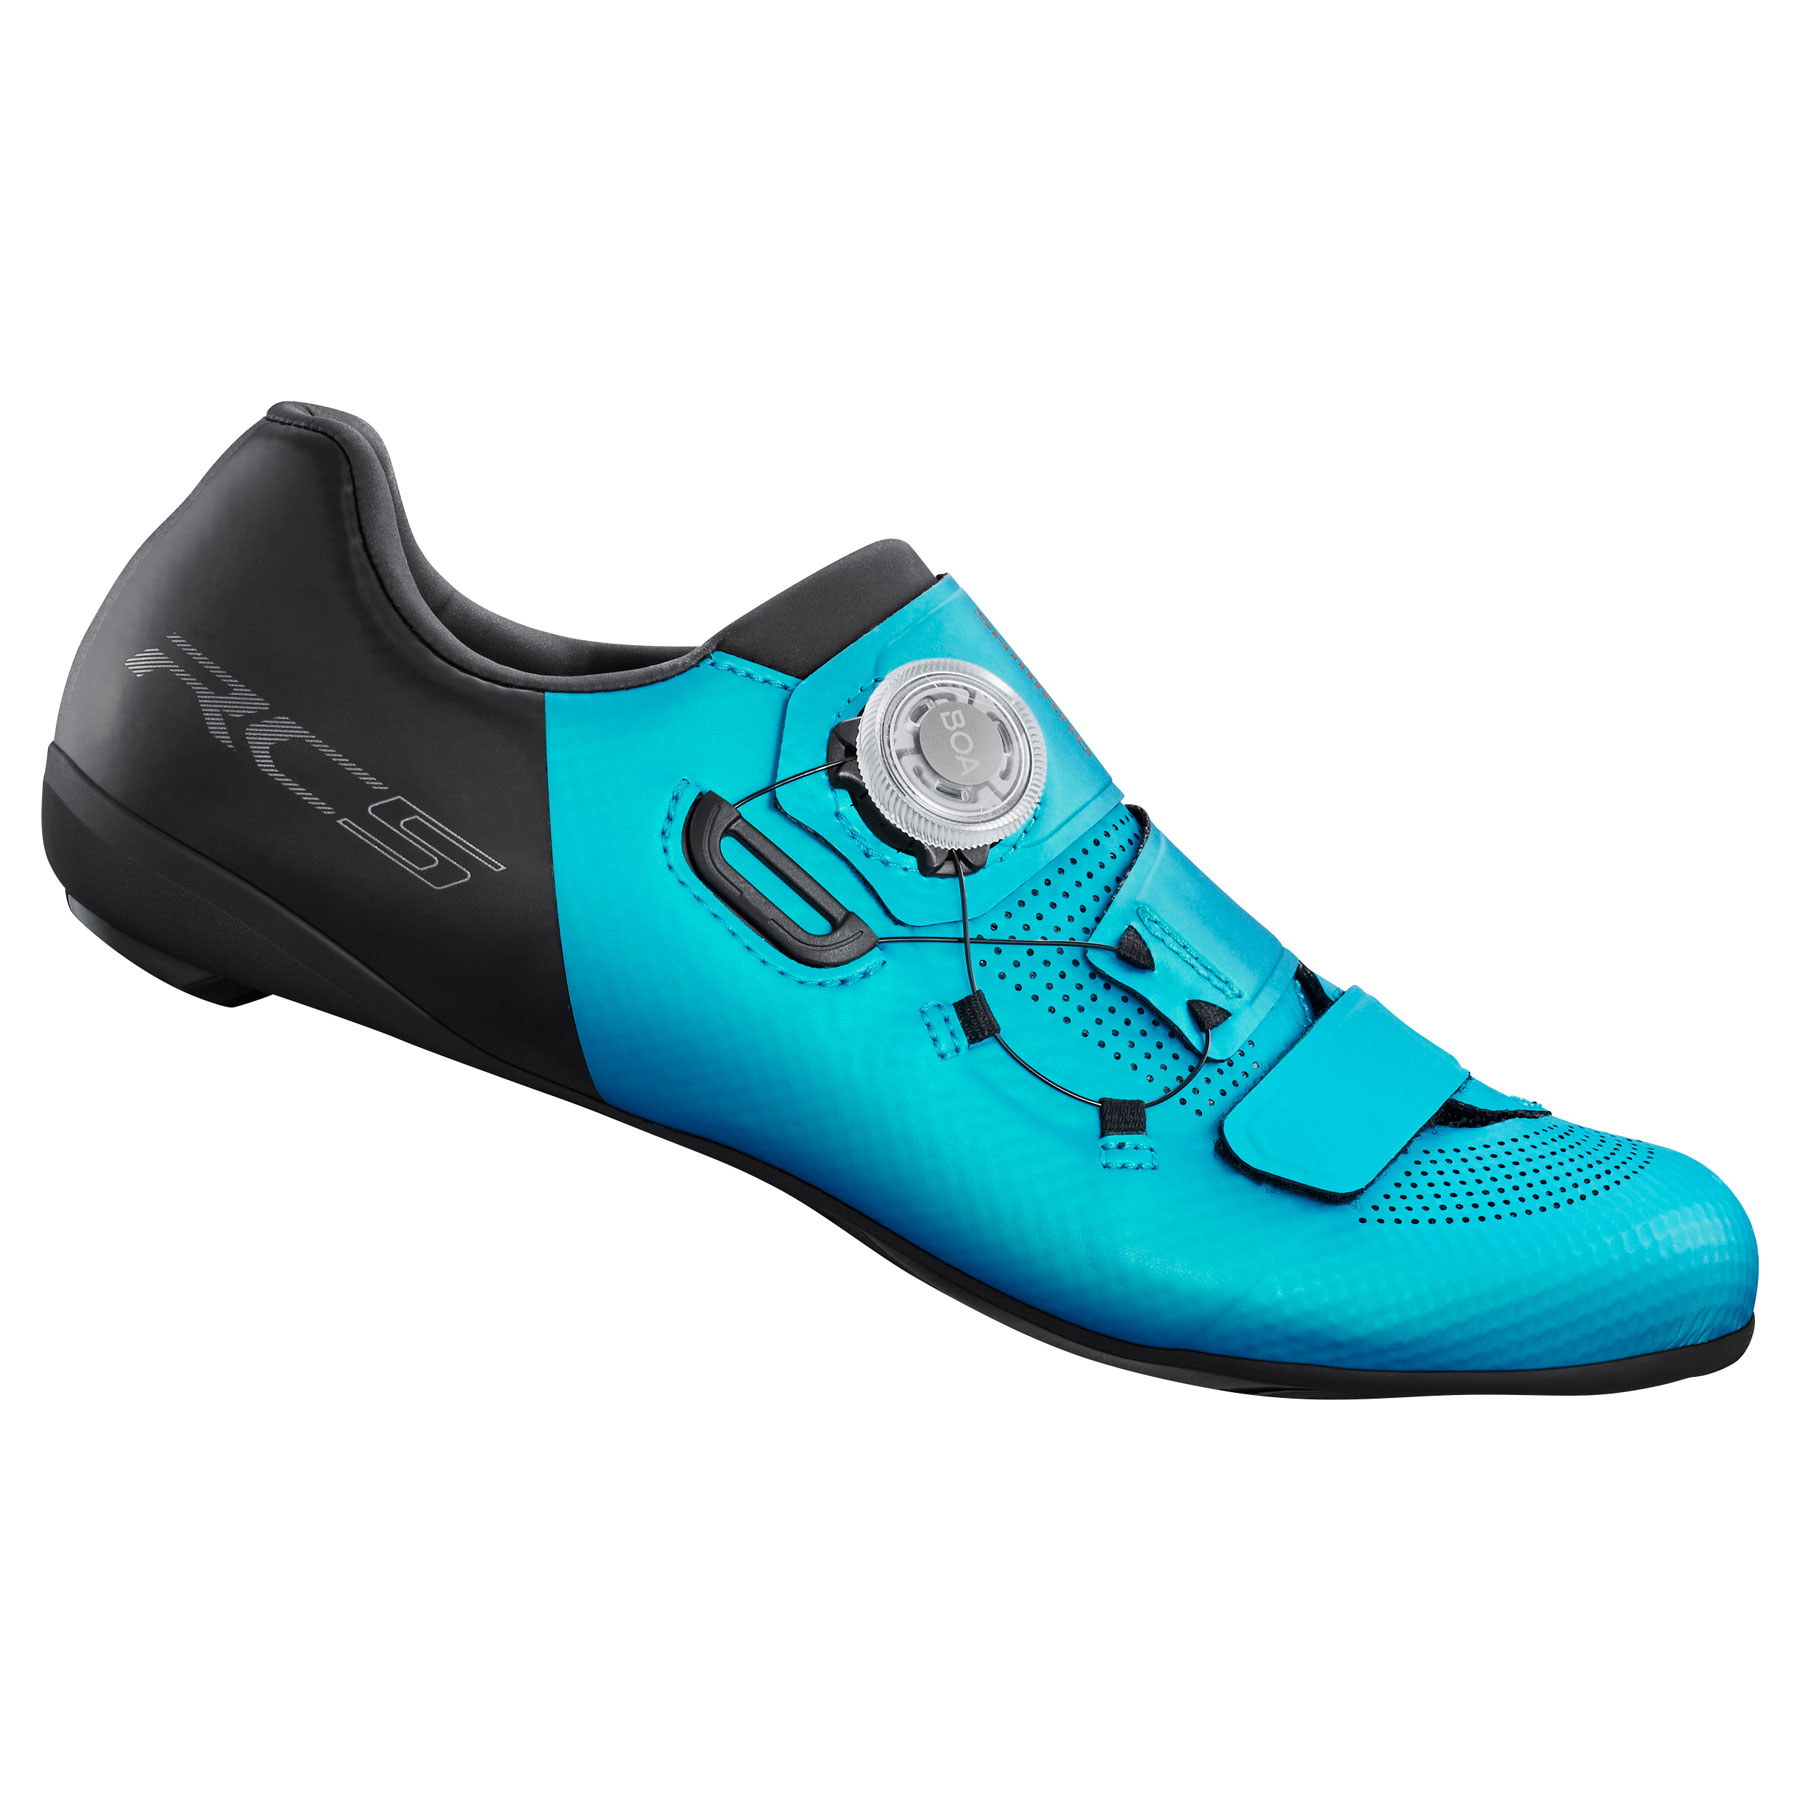 Picture of Shimano SH-RC502 Road Bike Shoes Women - Turquoise